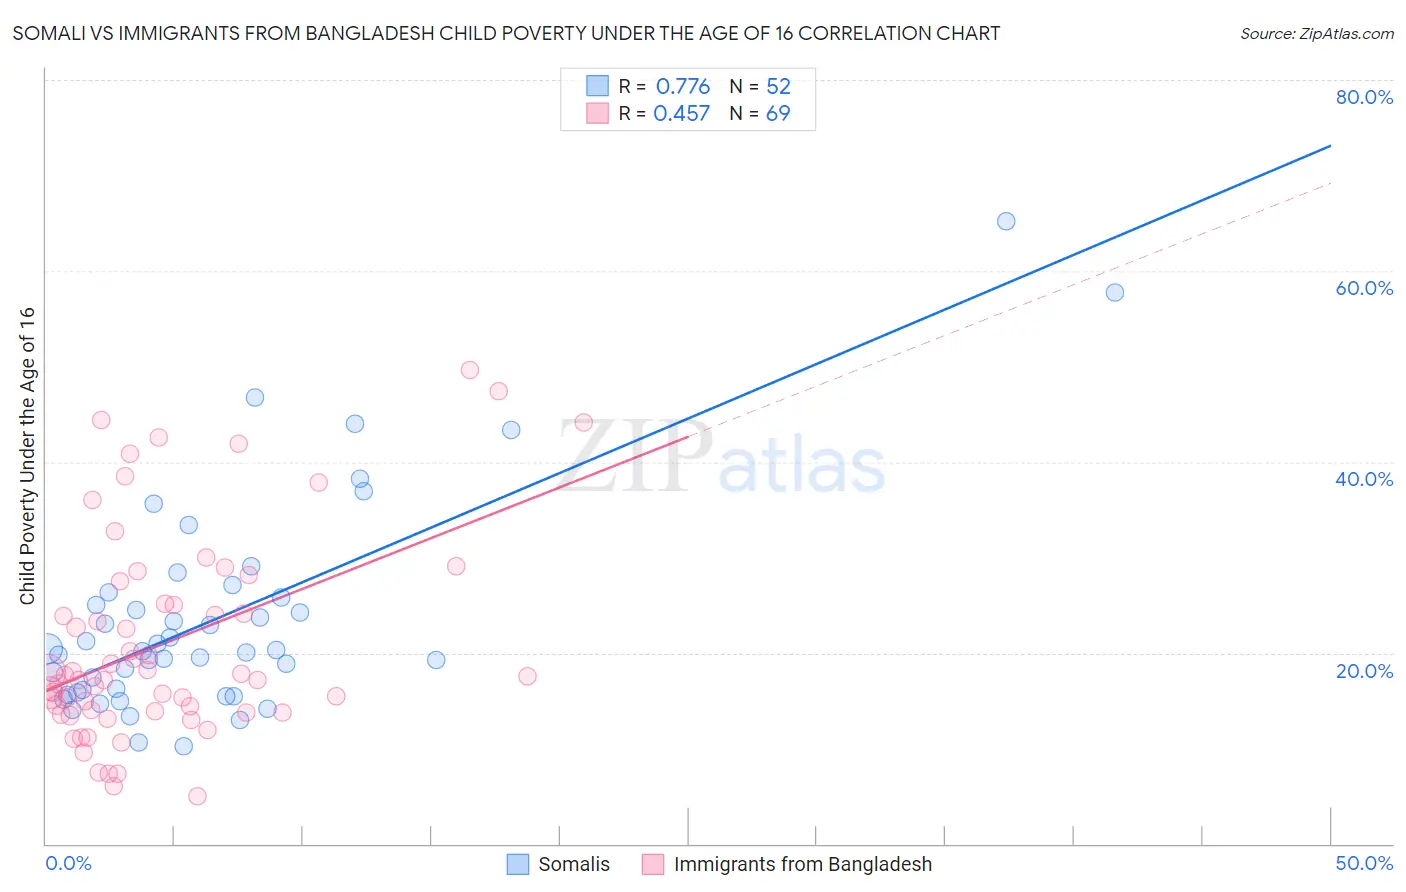 Somali vs Immigrants from Bangladesh Child Poverty Under the Age of 16